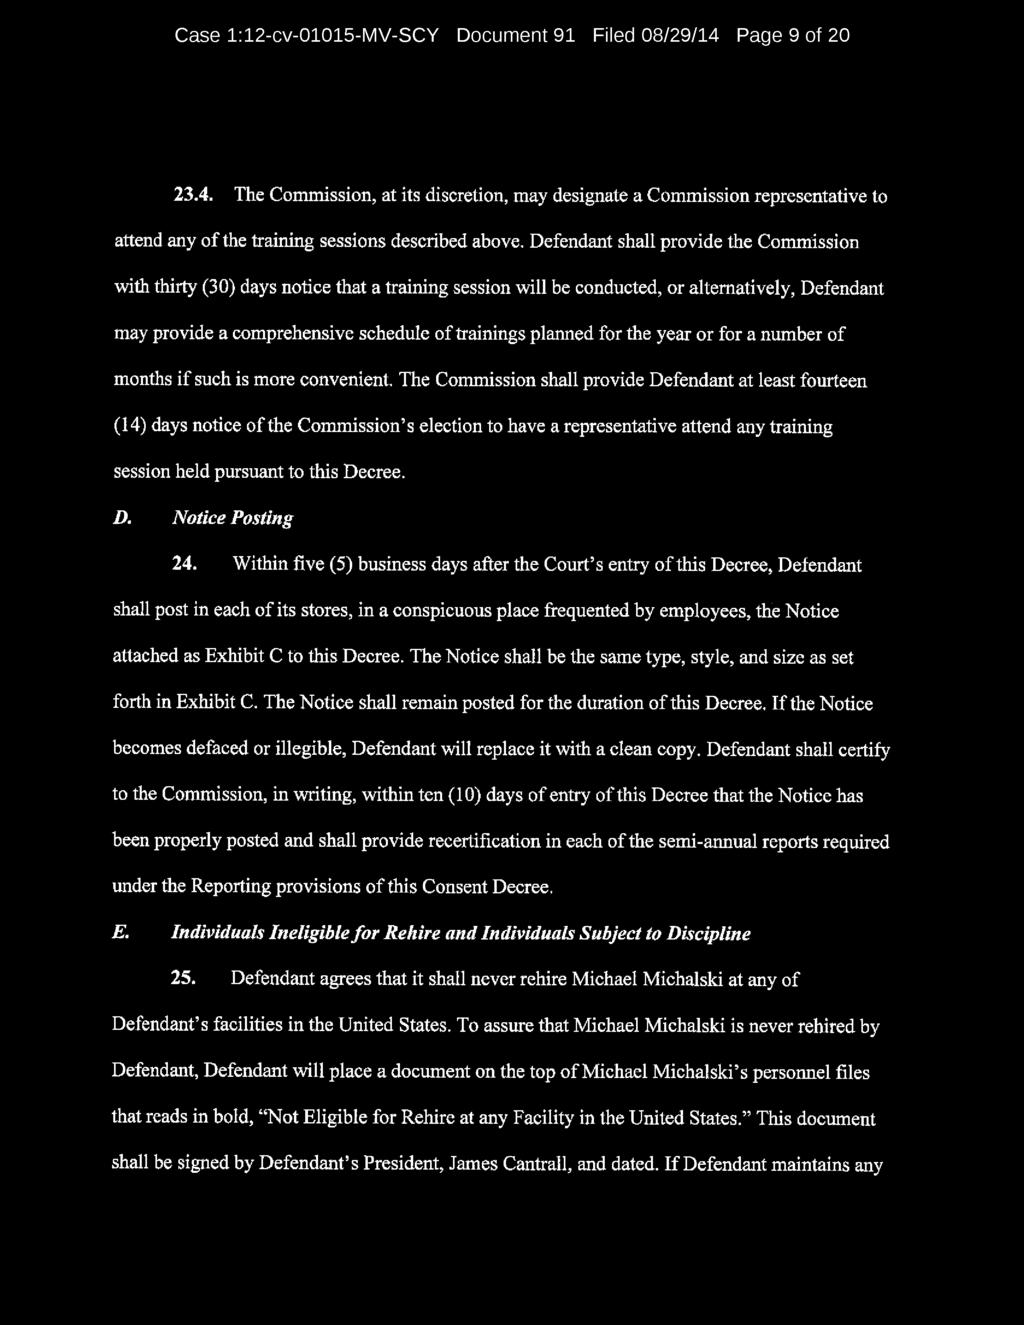 Case 1:12-cv-01015-M V-SC Y Docum ent 91 Filed 08/29/14 Page 9 of 20 23.4. The Commission, at its discretion, may designate a Commission representative to attend any of the training sessions described above.